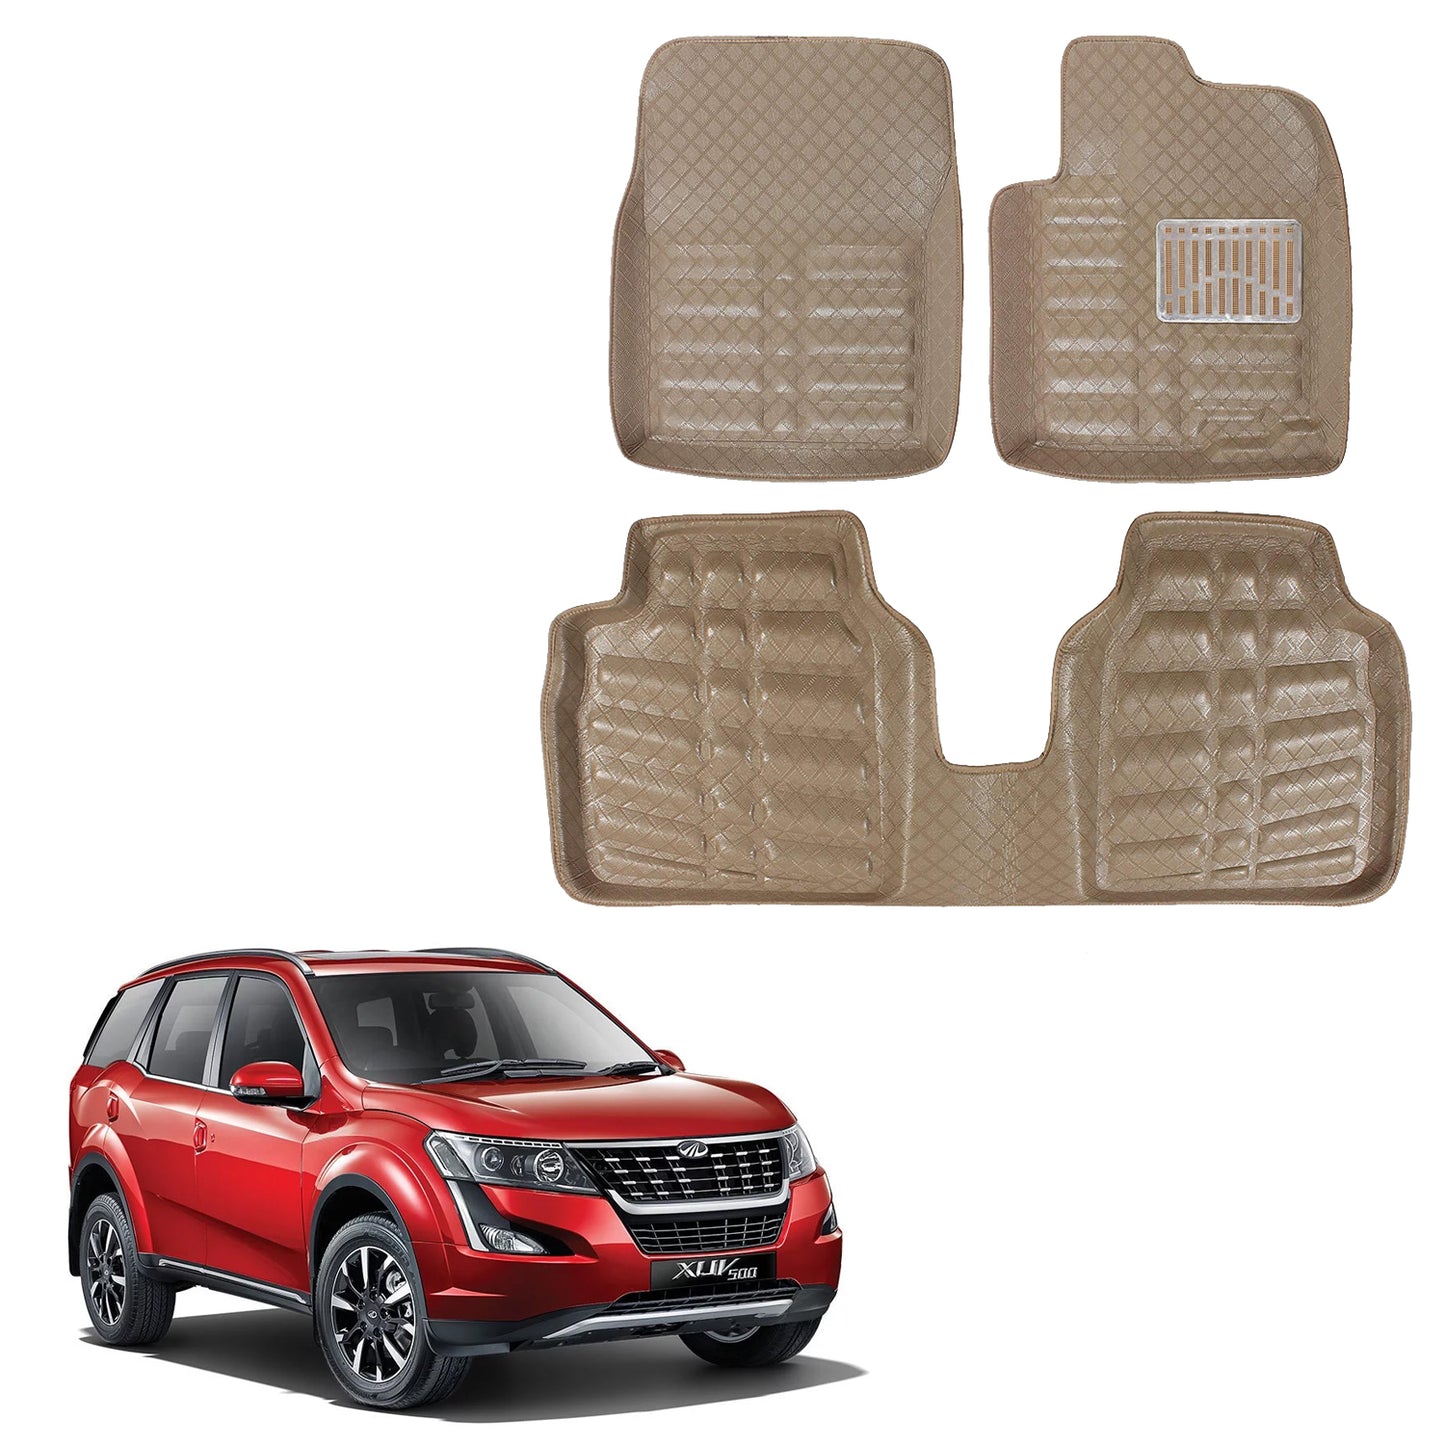 Oshotto 4D Artificial Leather Car Floor Mats For Mahindra XUV 500 - Set of 4 (Complete Mat with Third Row) - Beige